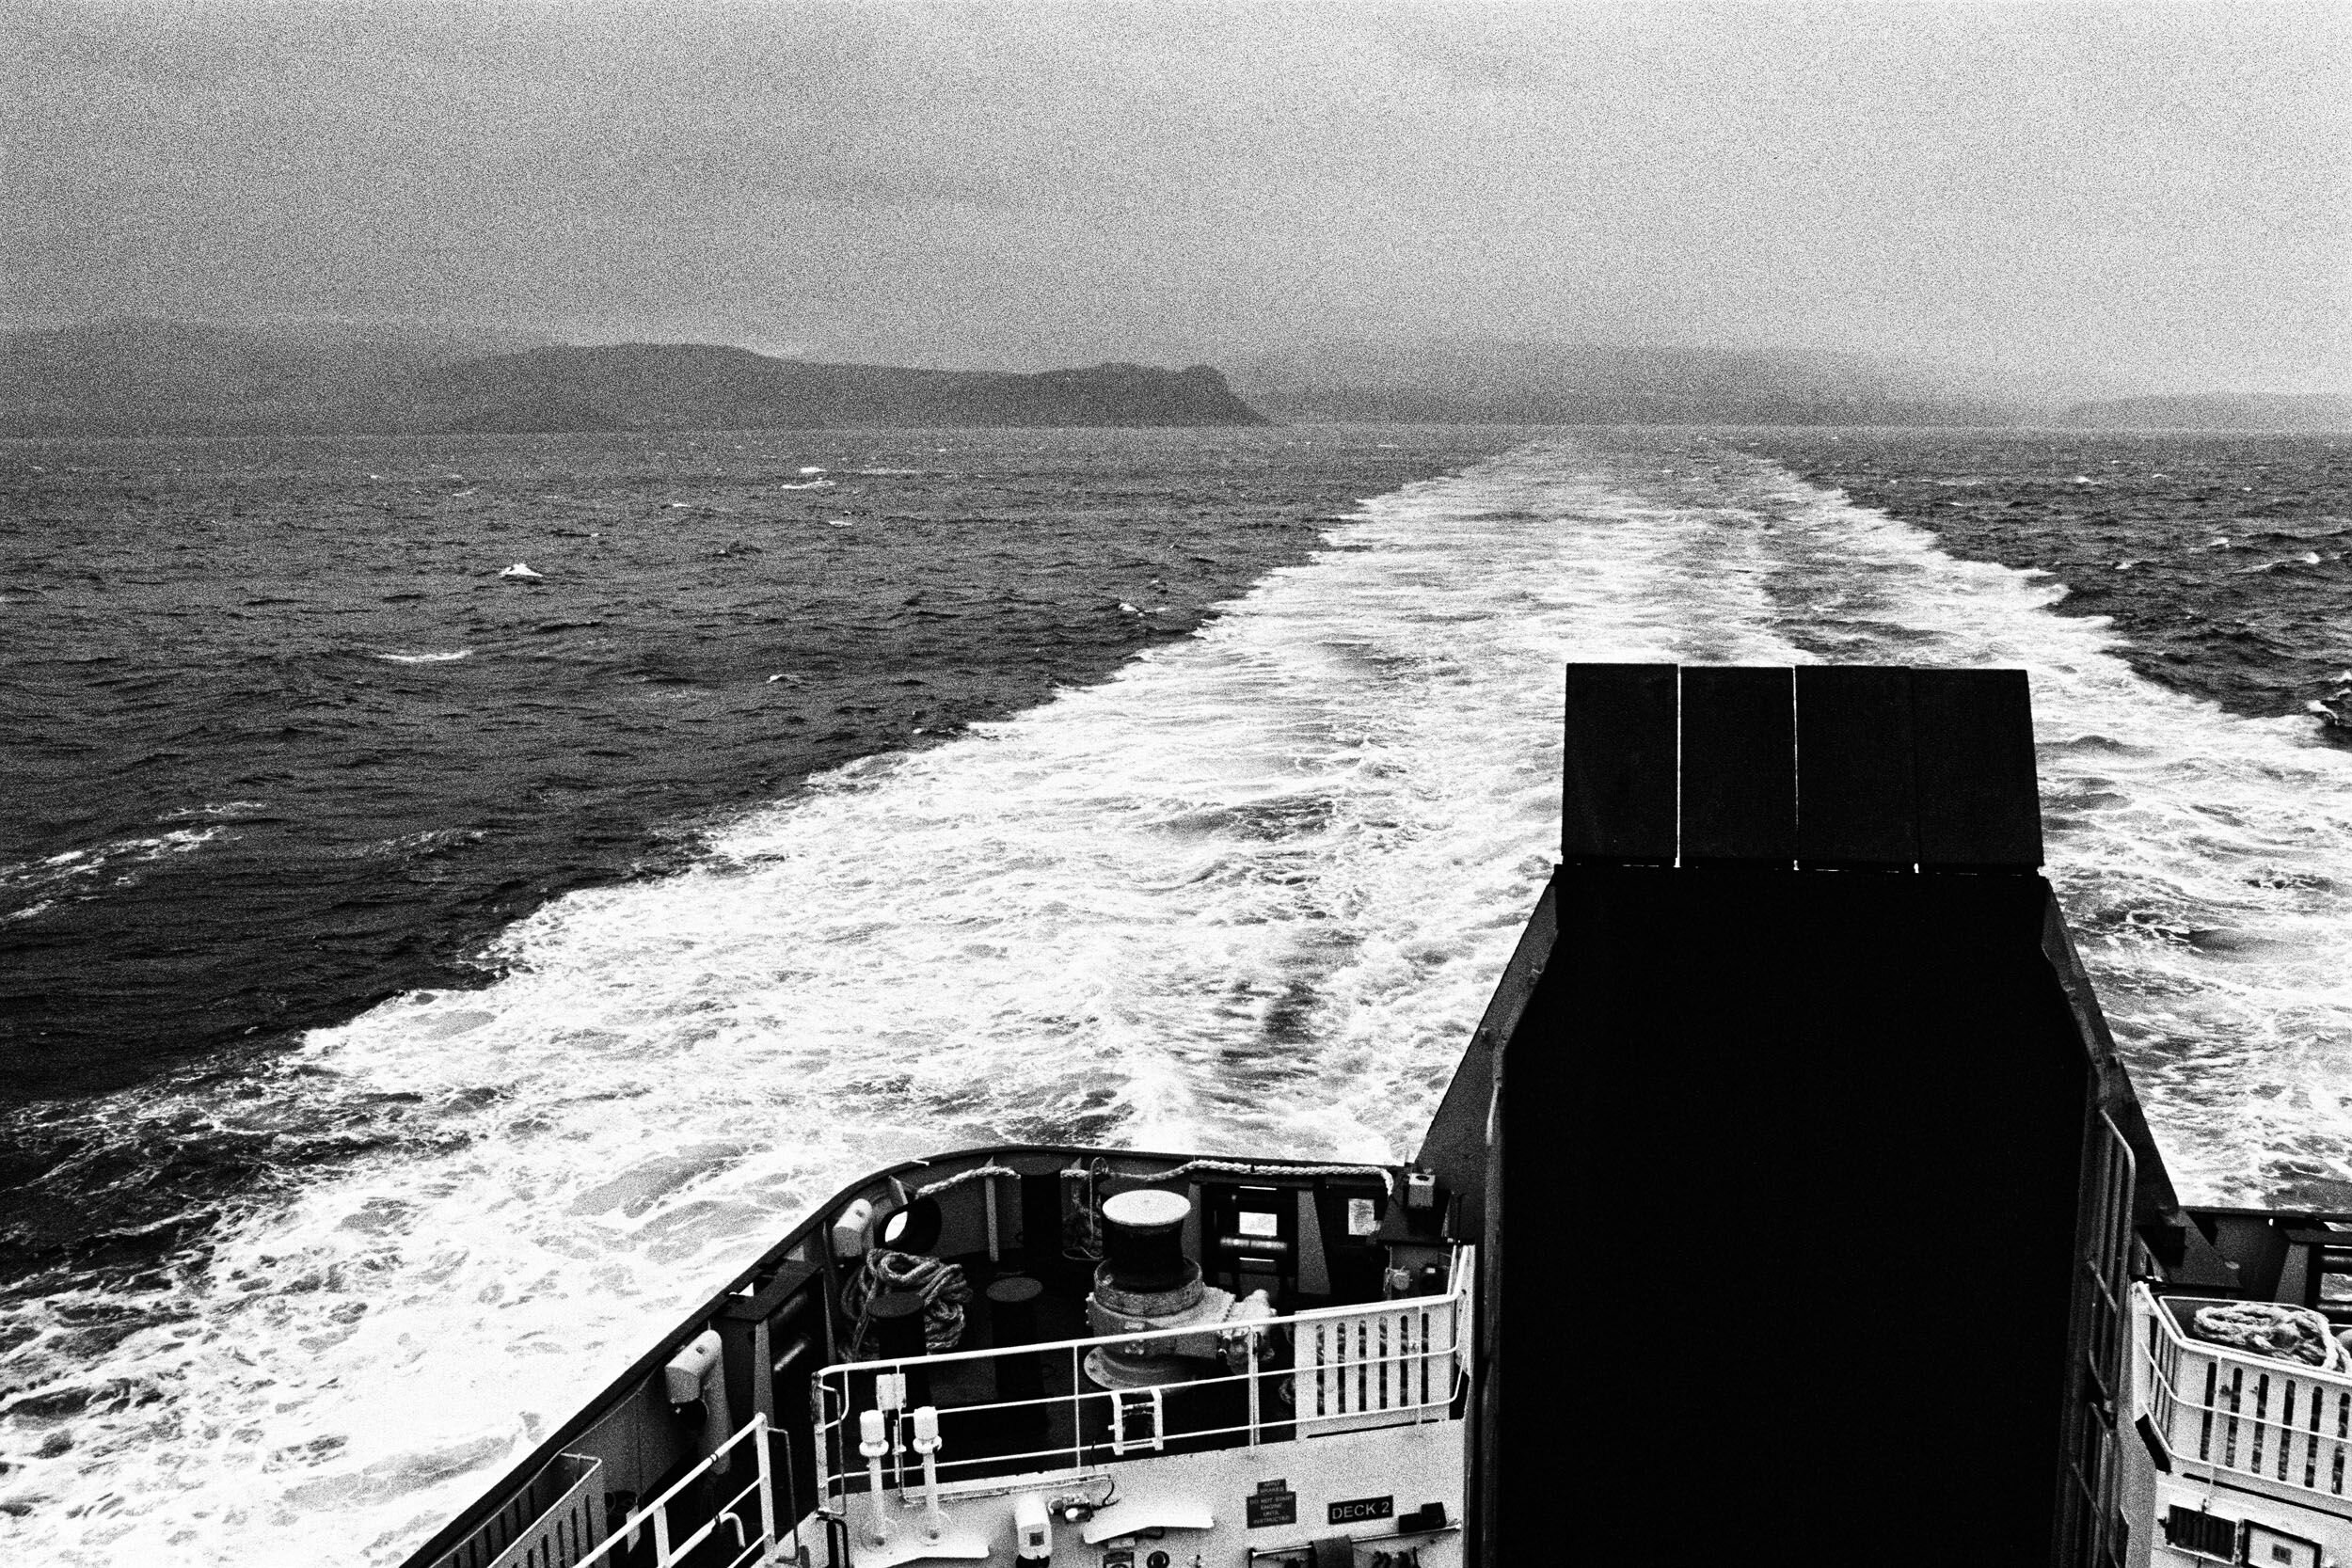  Looking Back, Boat from Uig to Lochmaddy, 2018 